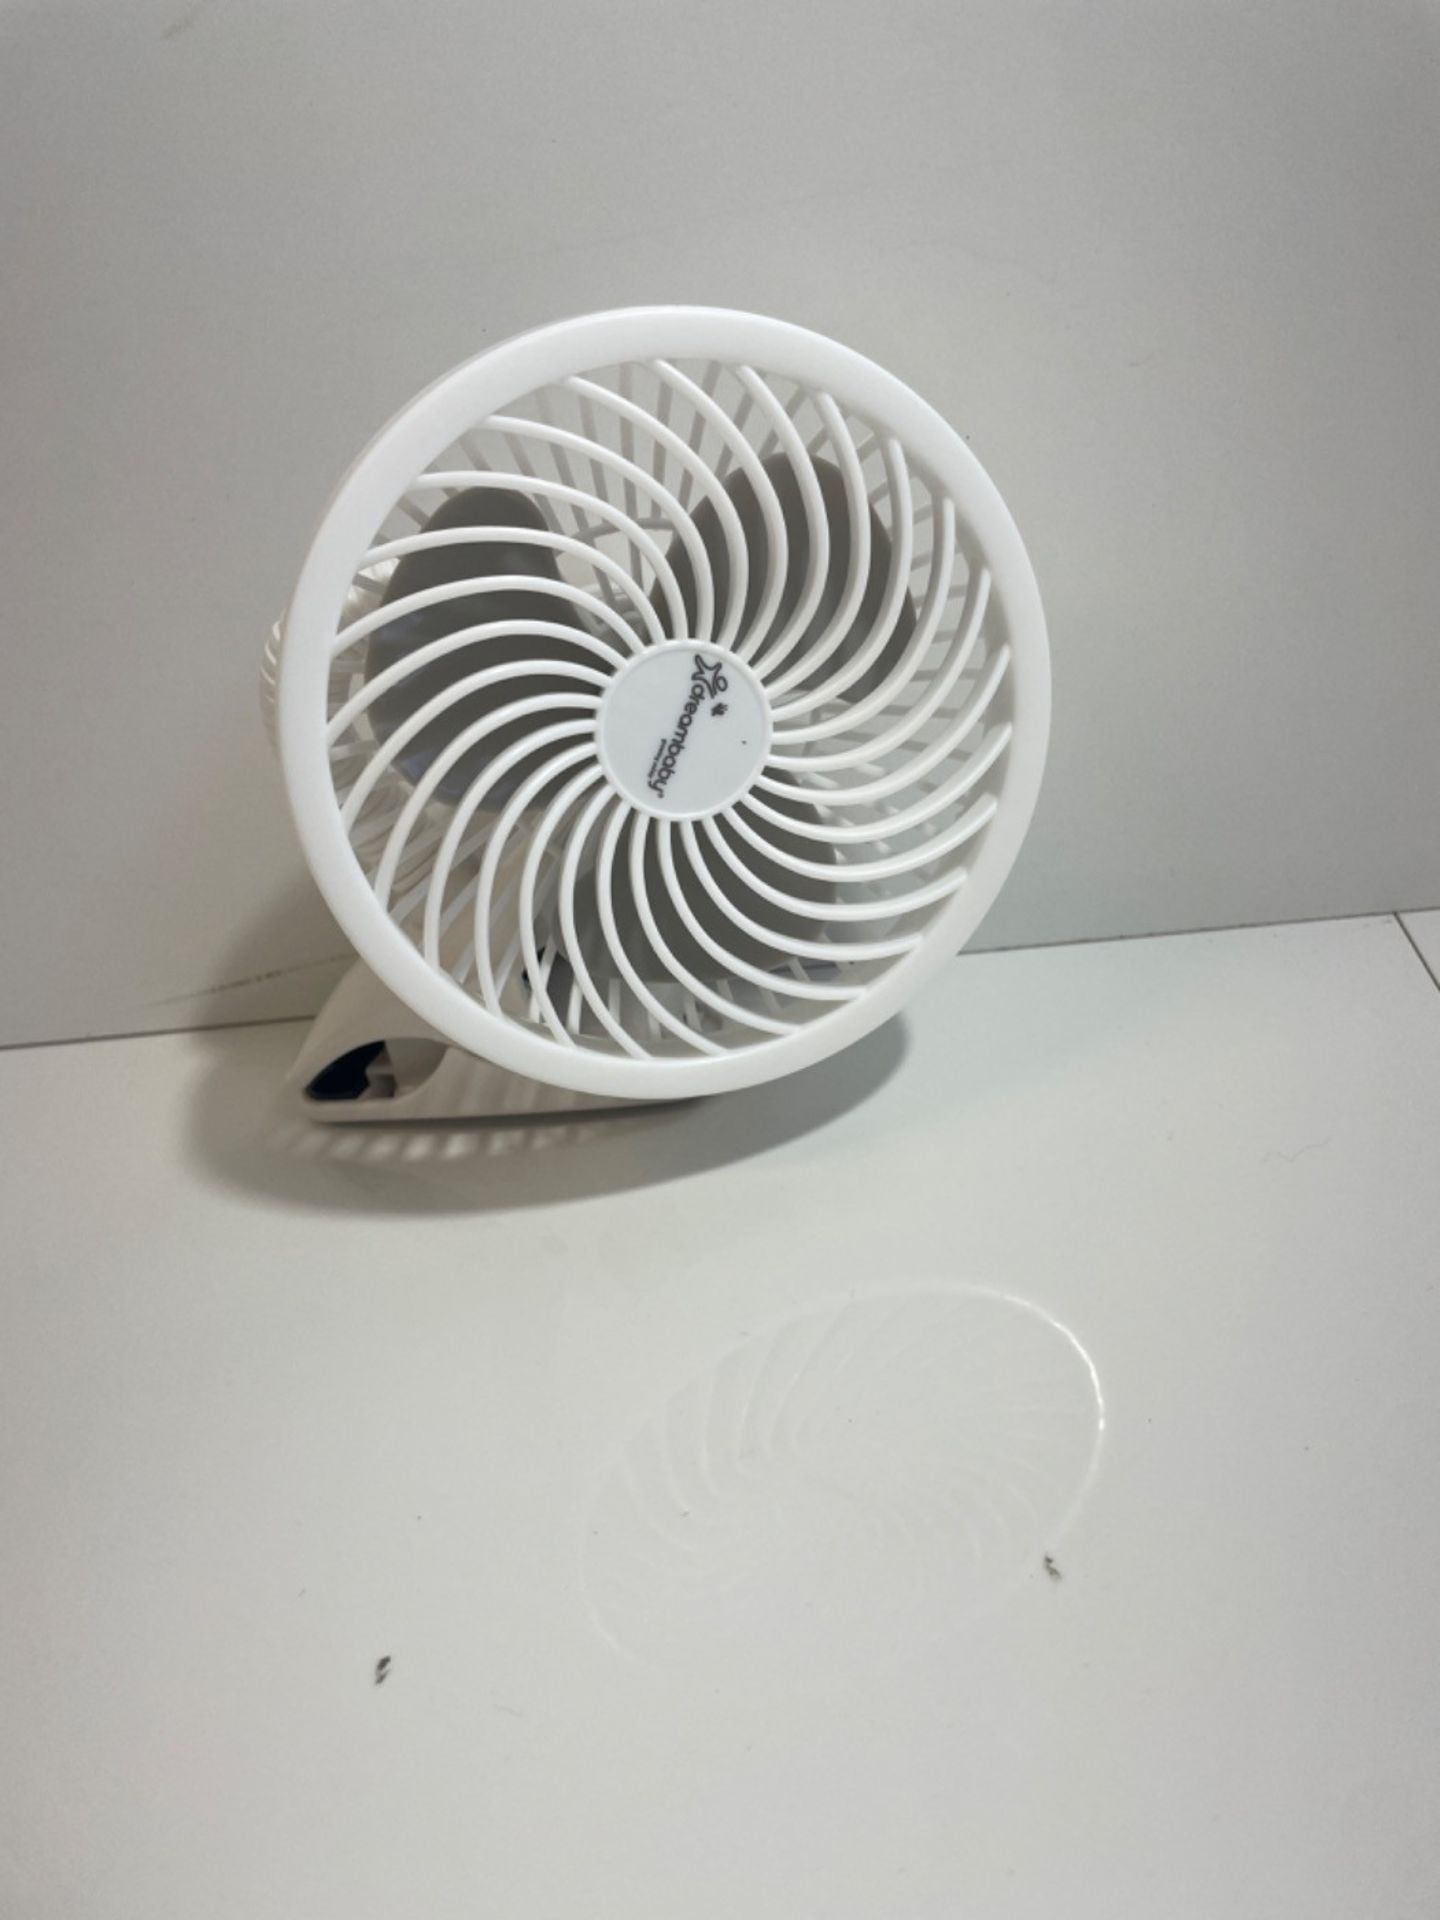 Dreambaby Caged Deluxe EZY-Fit Clip On Fan, White - Image 3 of 3